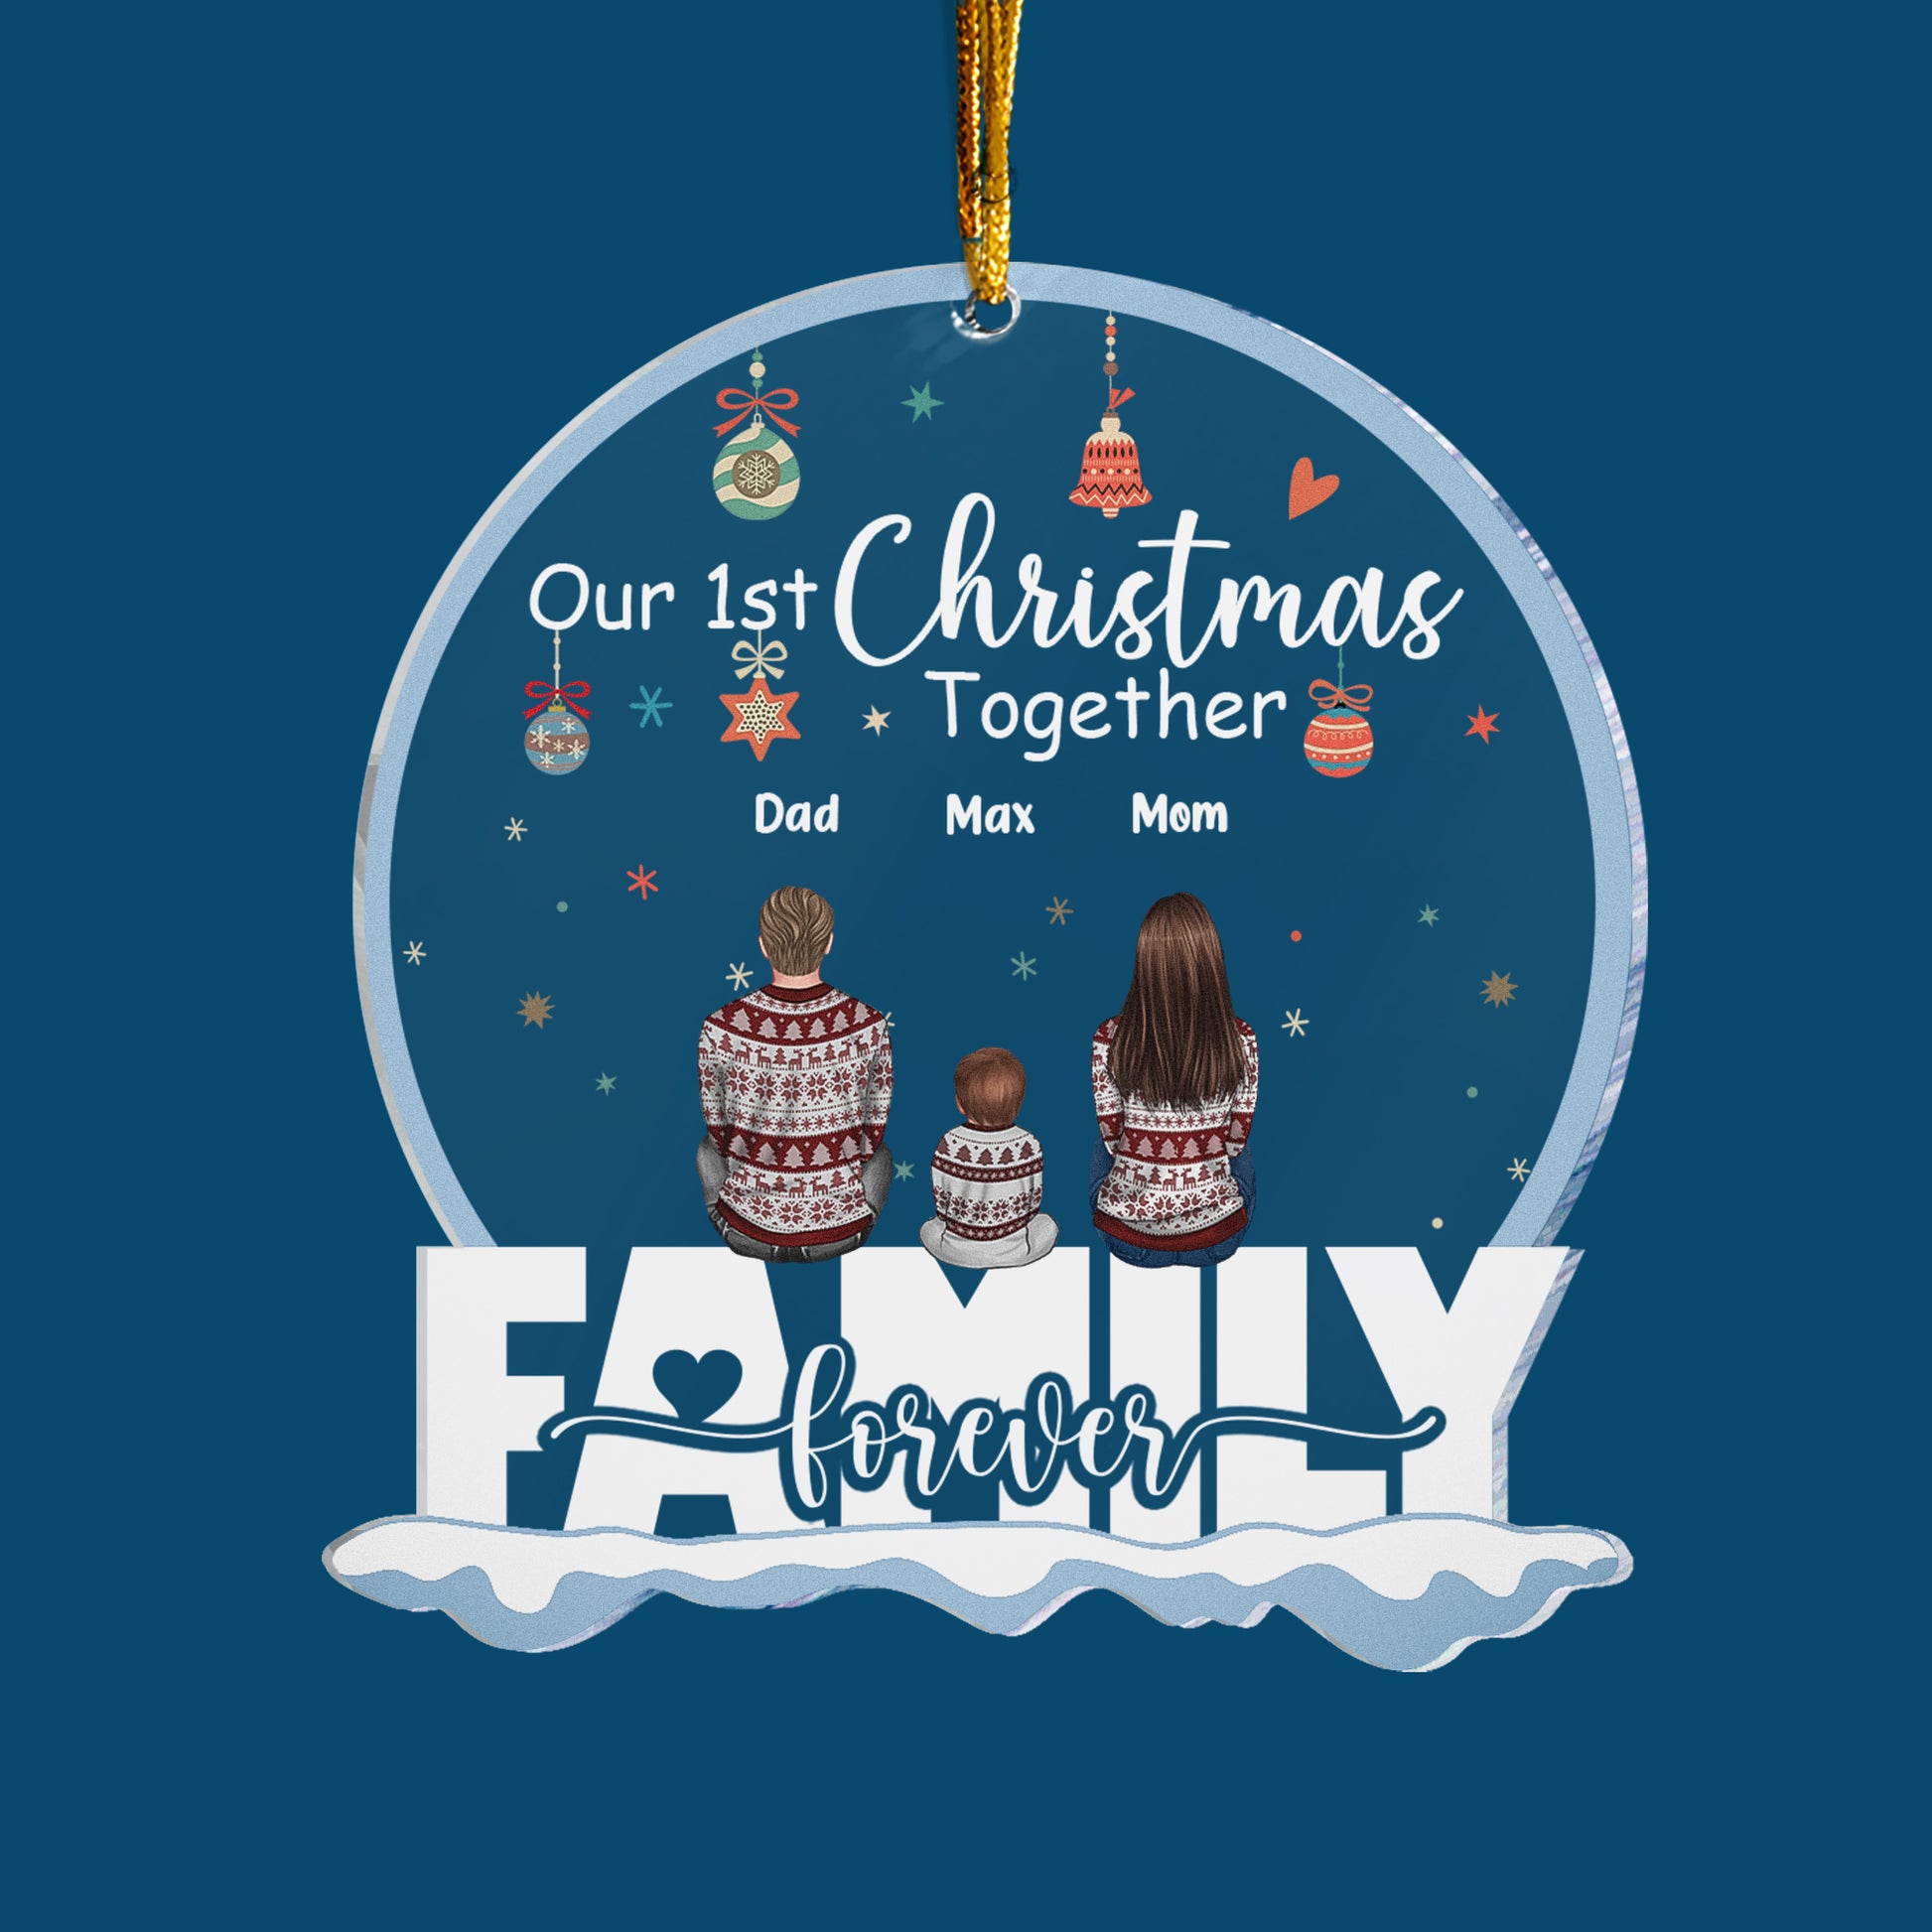 Our Christmas Together - Personalized Custom Shaped Acrylic Ornament - Christmas Gift For Family, Newly Wed, Couple, Boyfriend, Girlfriend, Husband, Wife